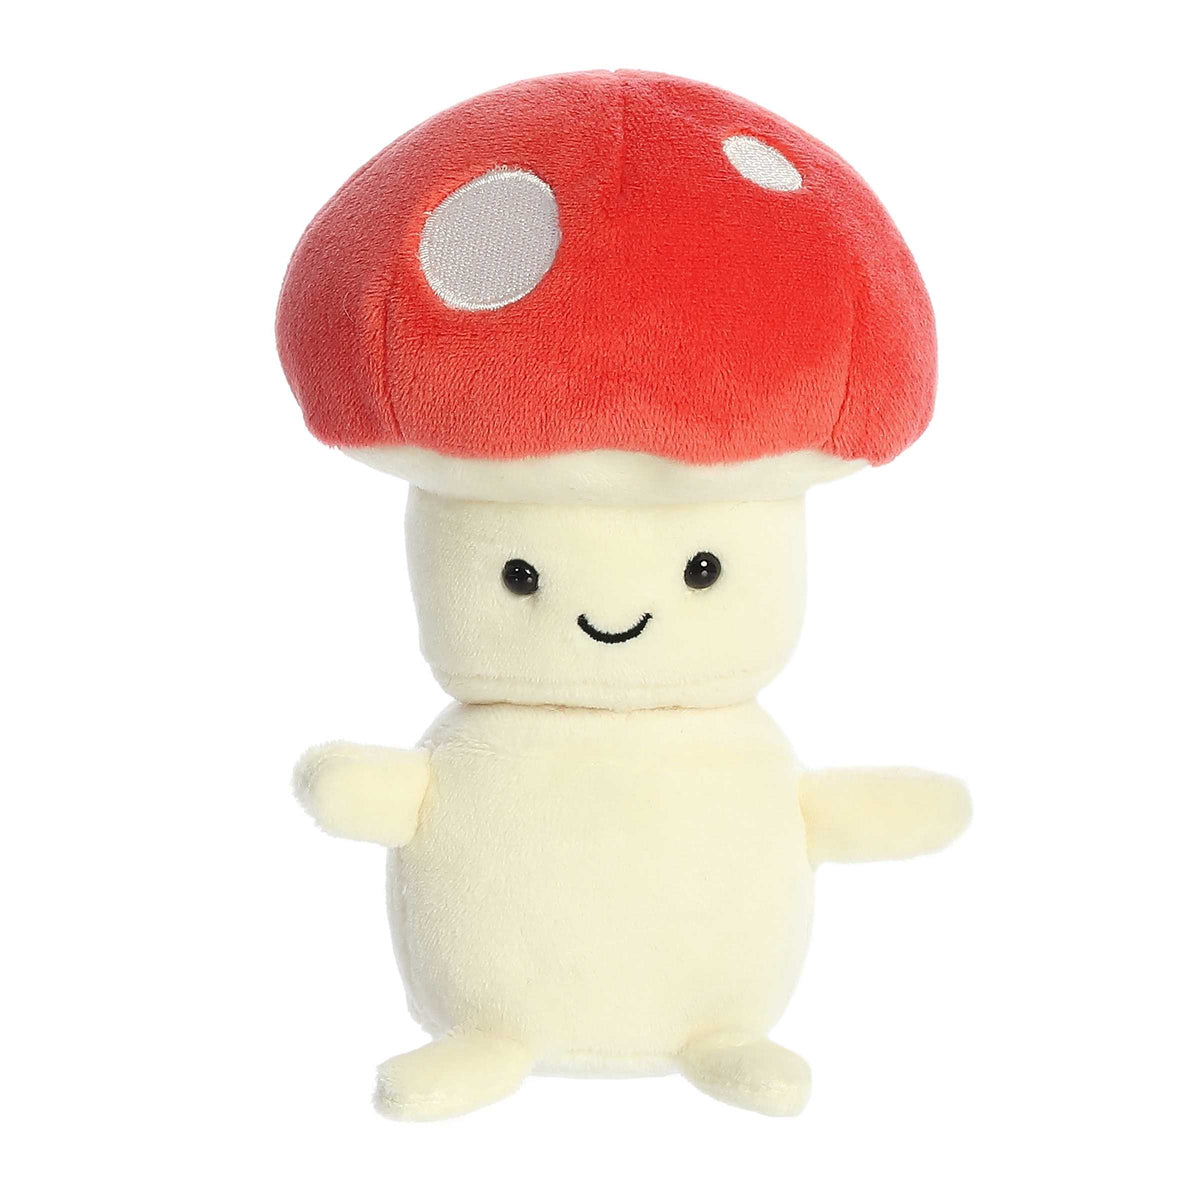 Land of Lils Mushroom from Aurora's Spring Collection, an adorable red-capped mushroom plush with a friendly face